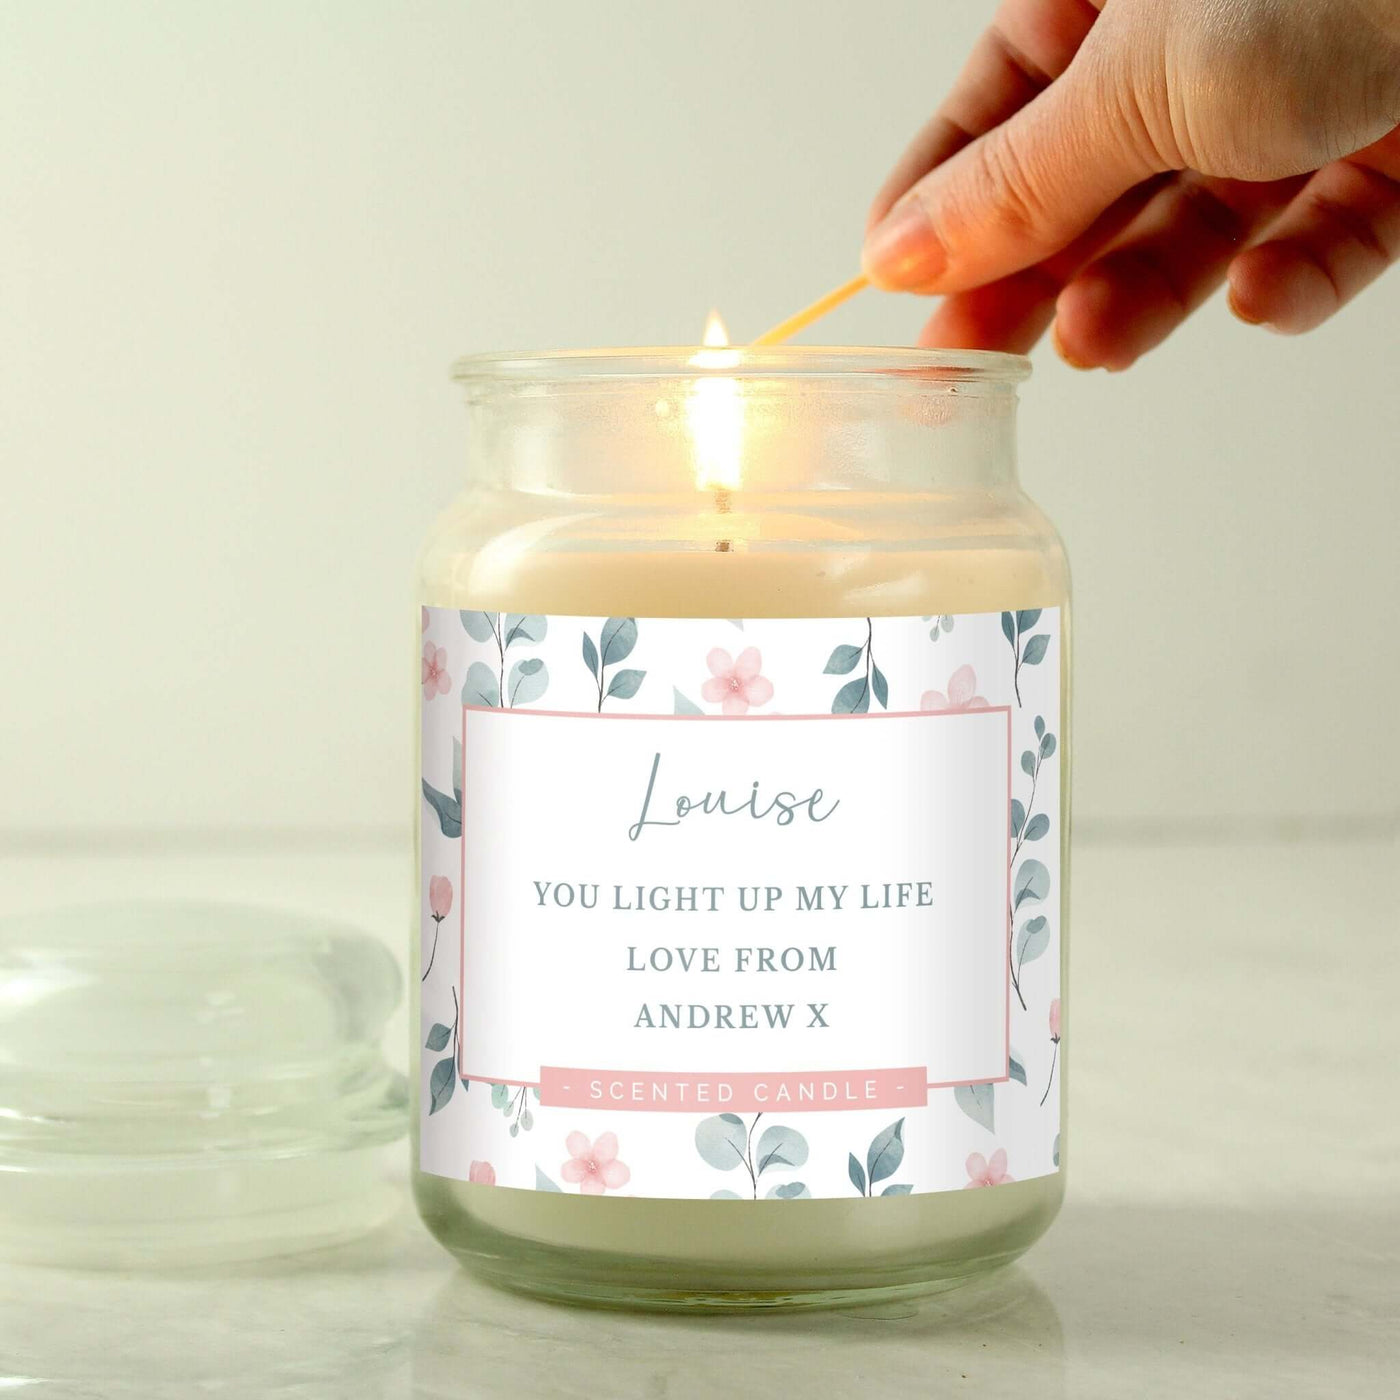 Personalised Large Floral Scented Jar Candle - LIVE LAUGH LOVE LIMITED